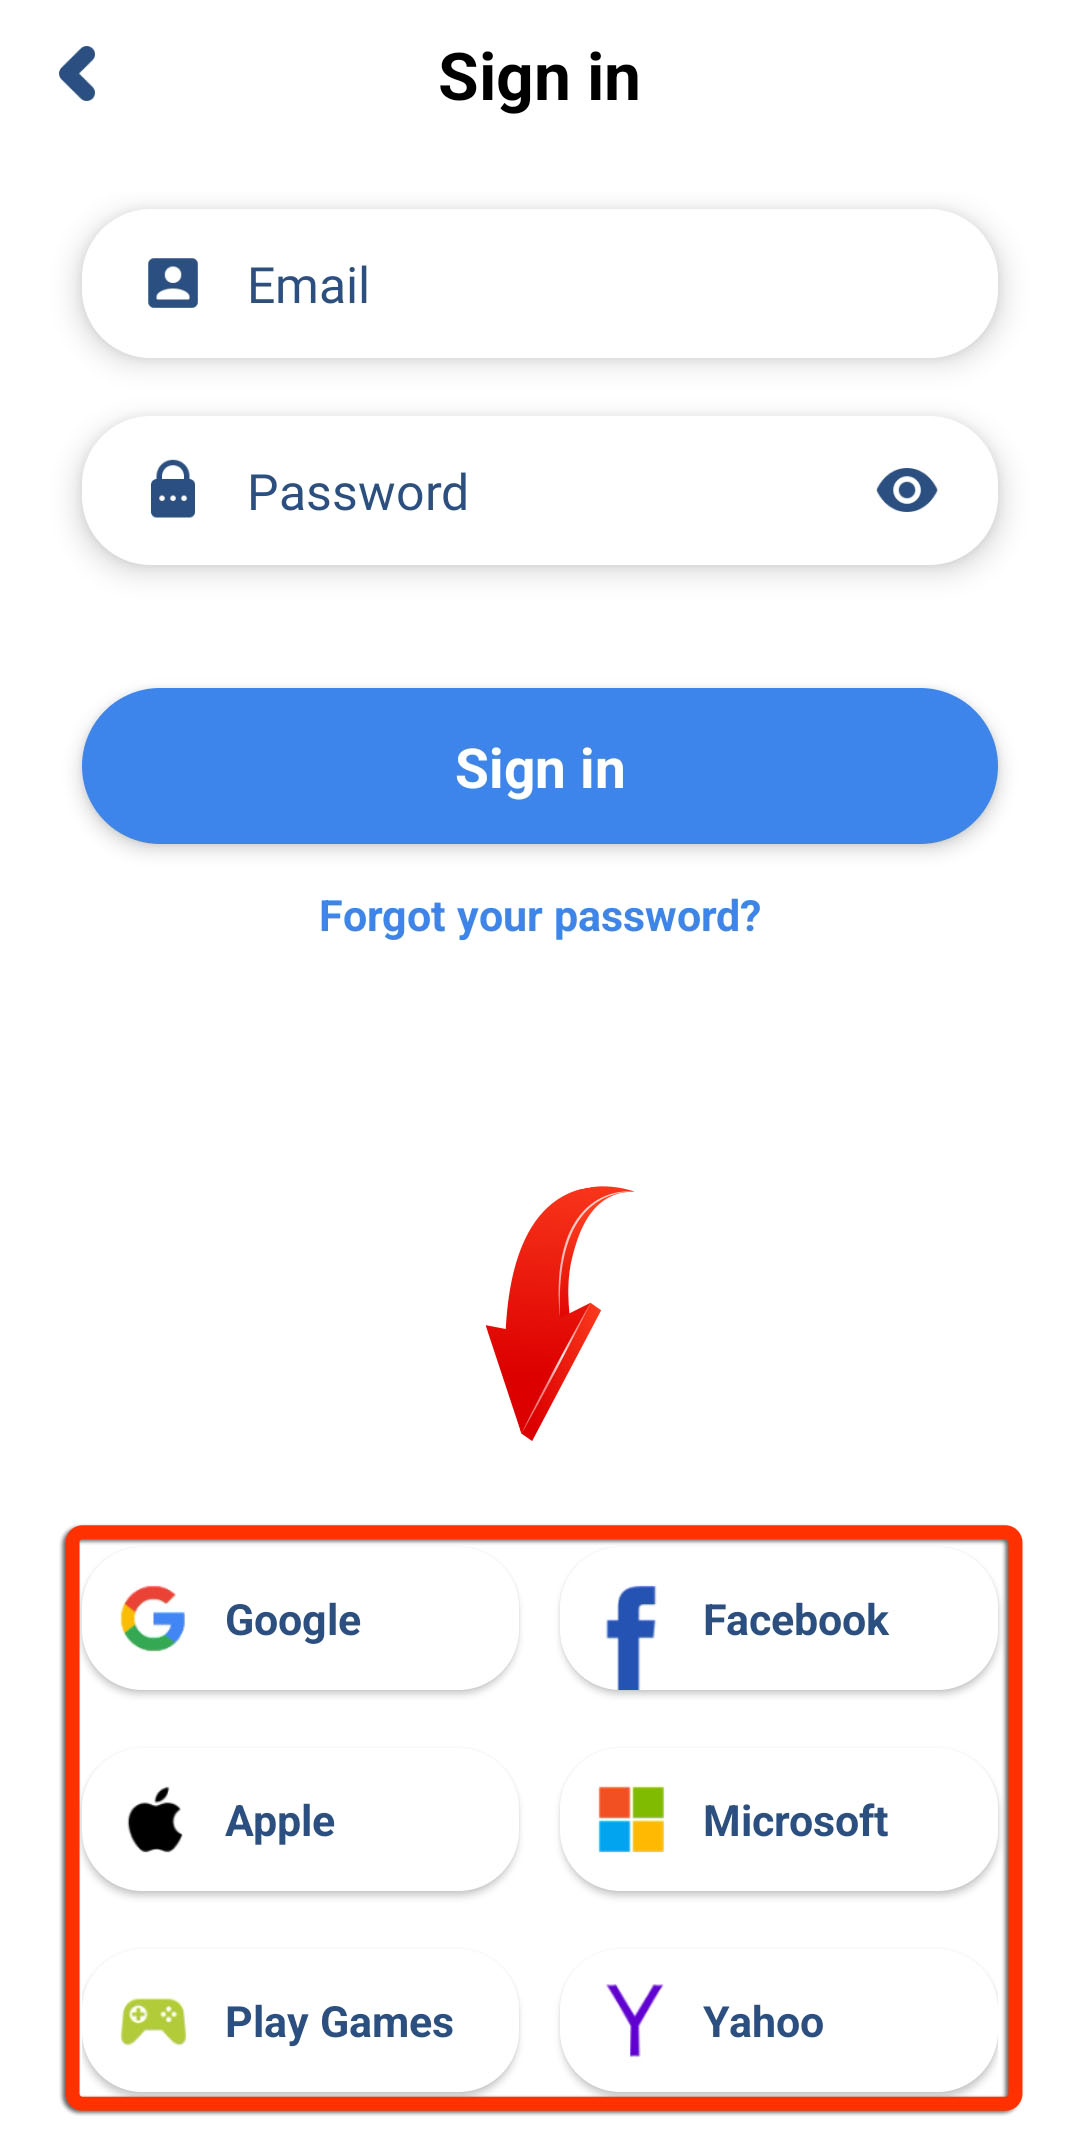 Sign in with Google.jpg